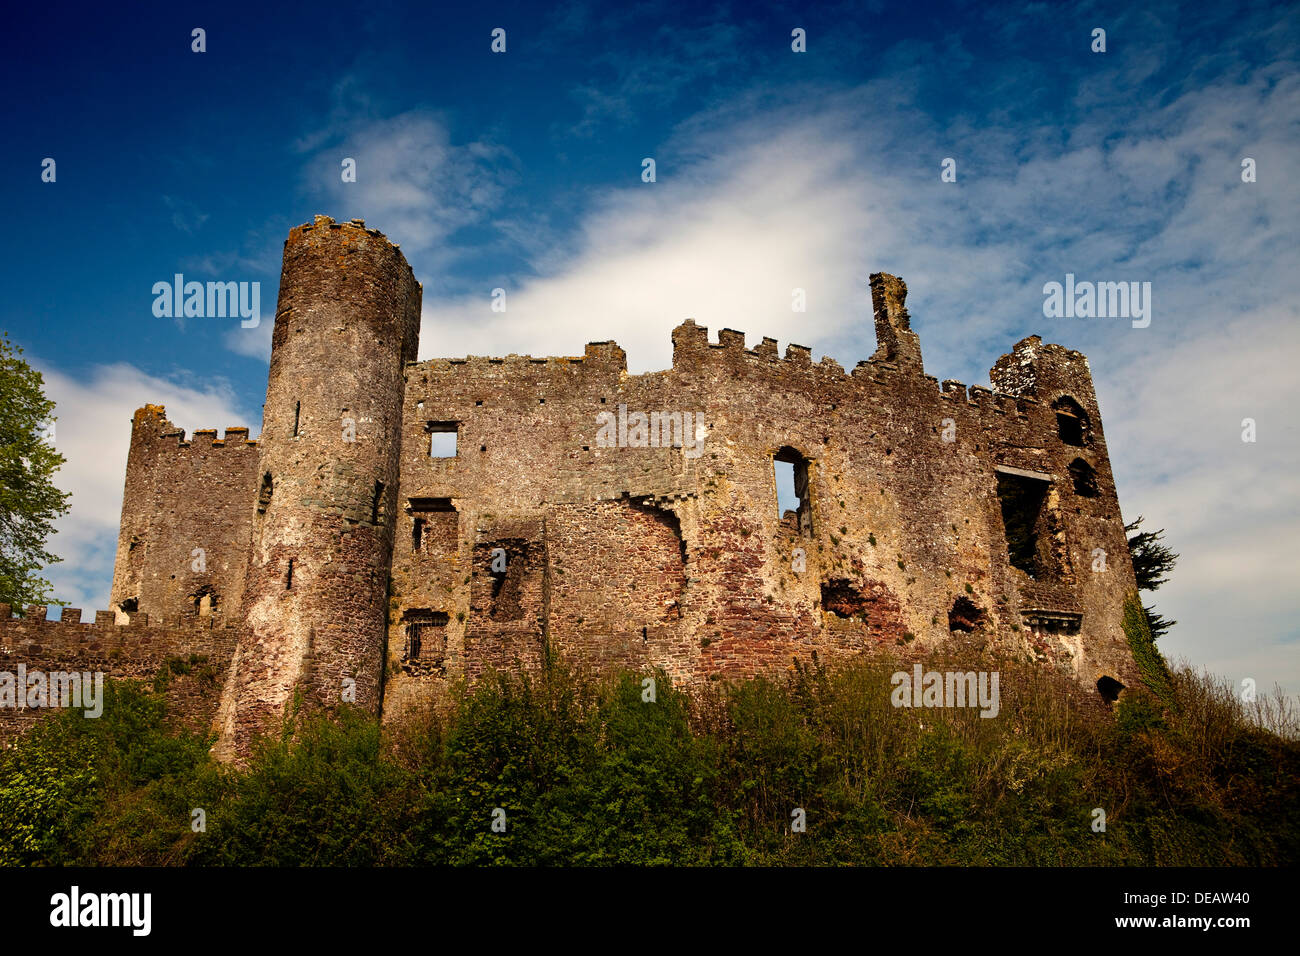 Laugharne Castello, Laugharne, southern Carmarthenshire, Galles Foto Stock